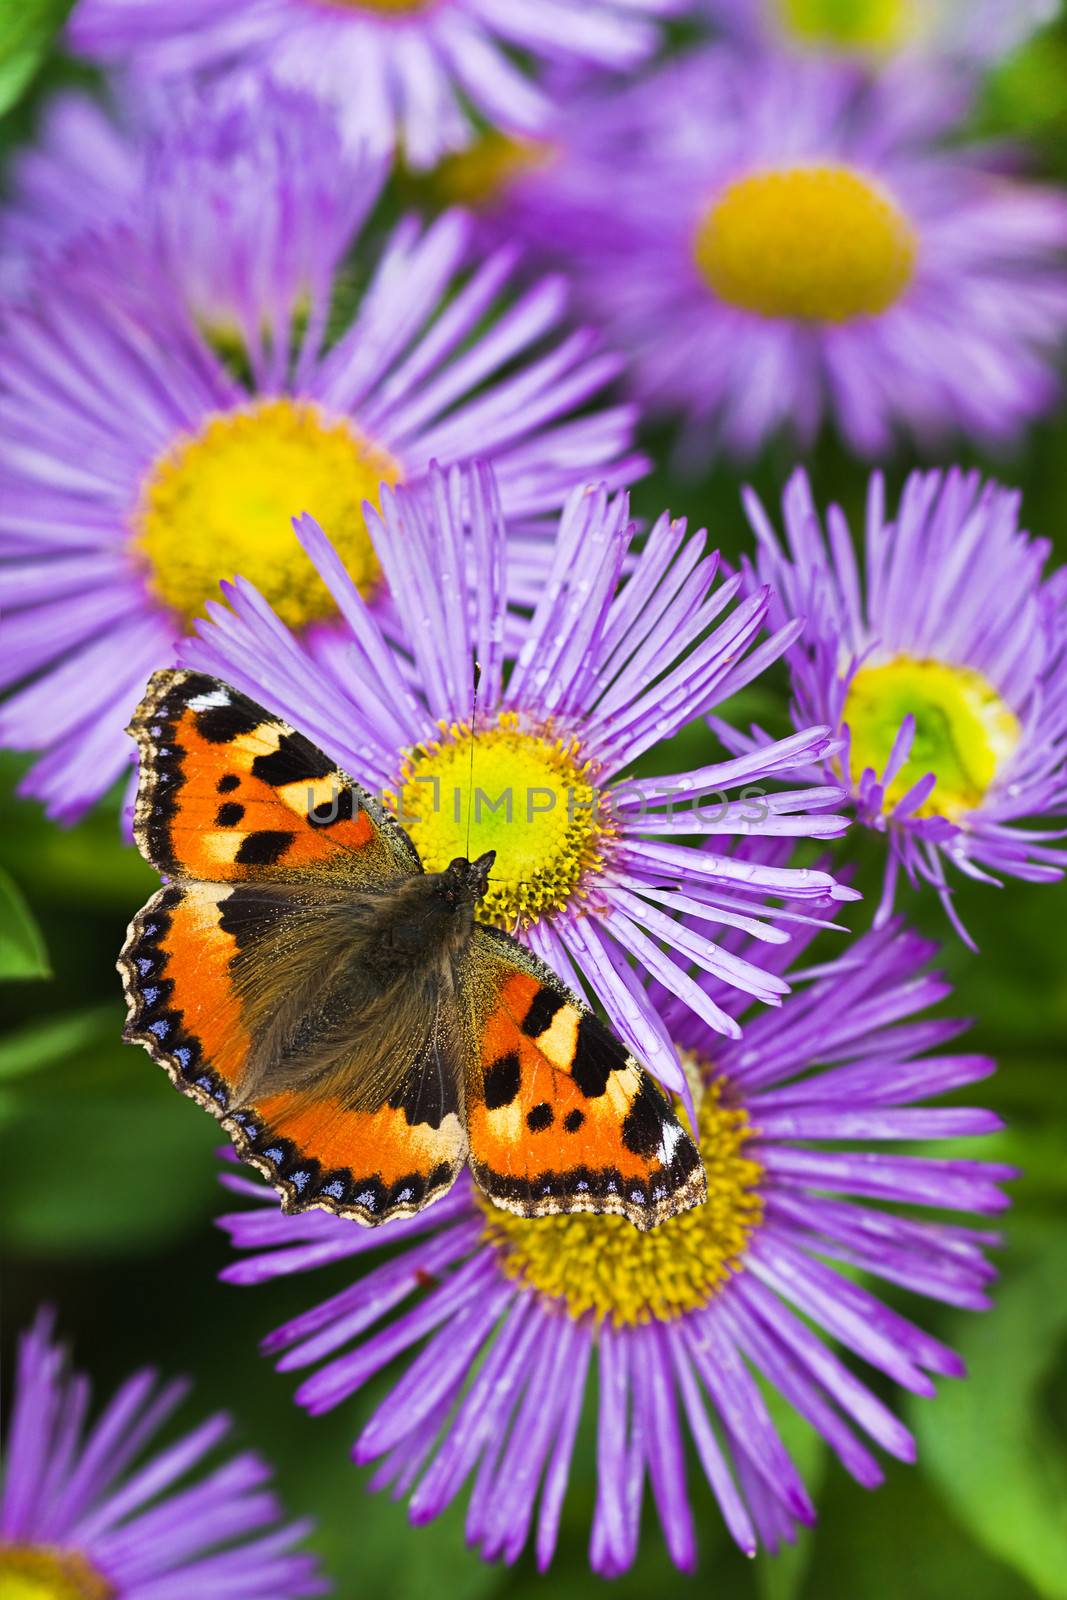 Tortoisesehell butterfly on Aster flowers by Colette